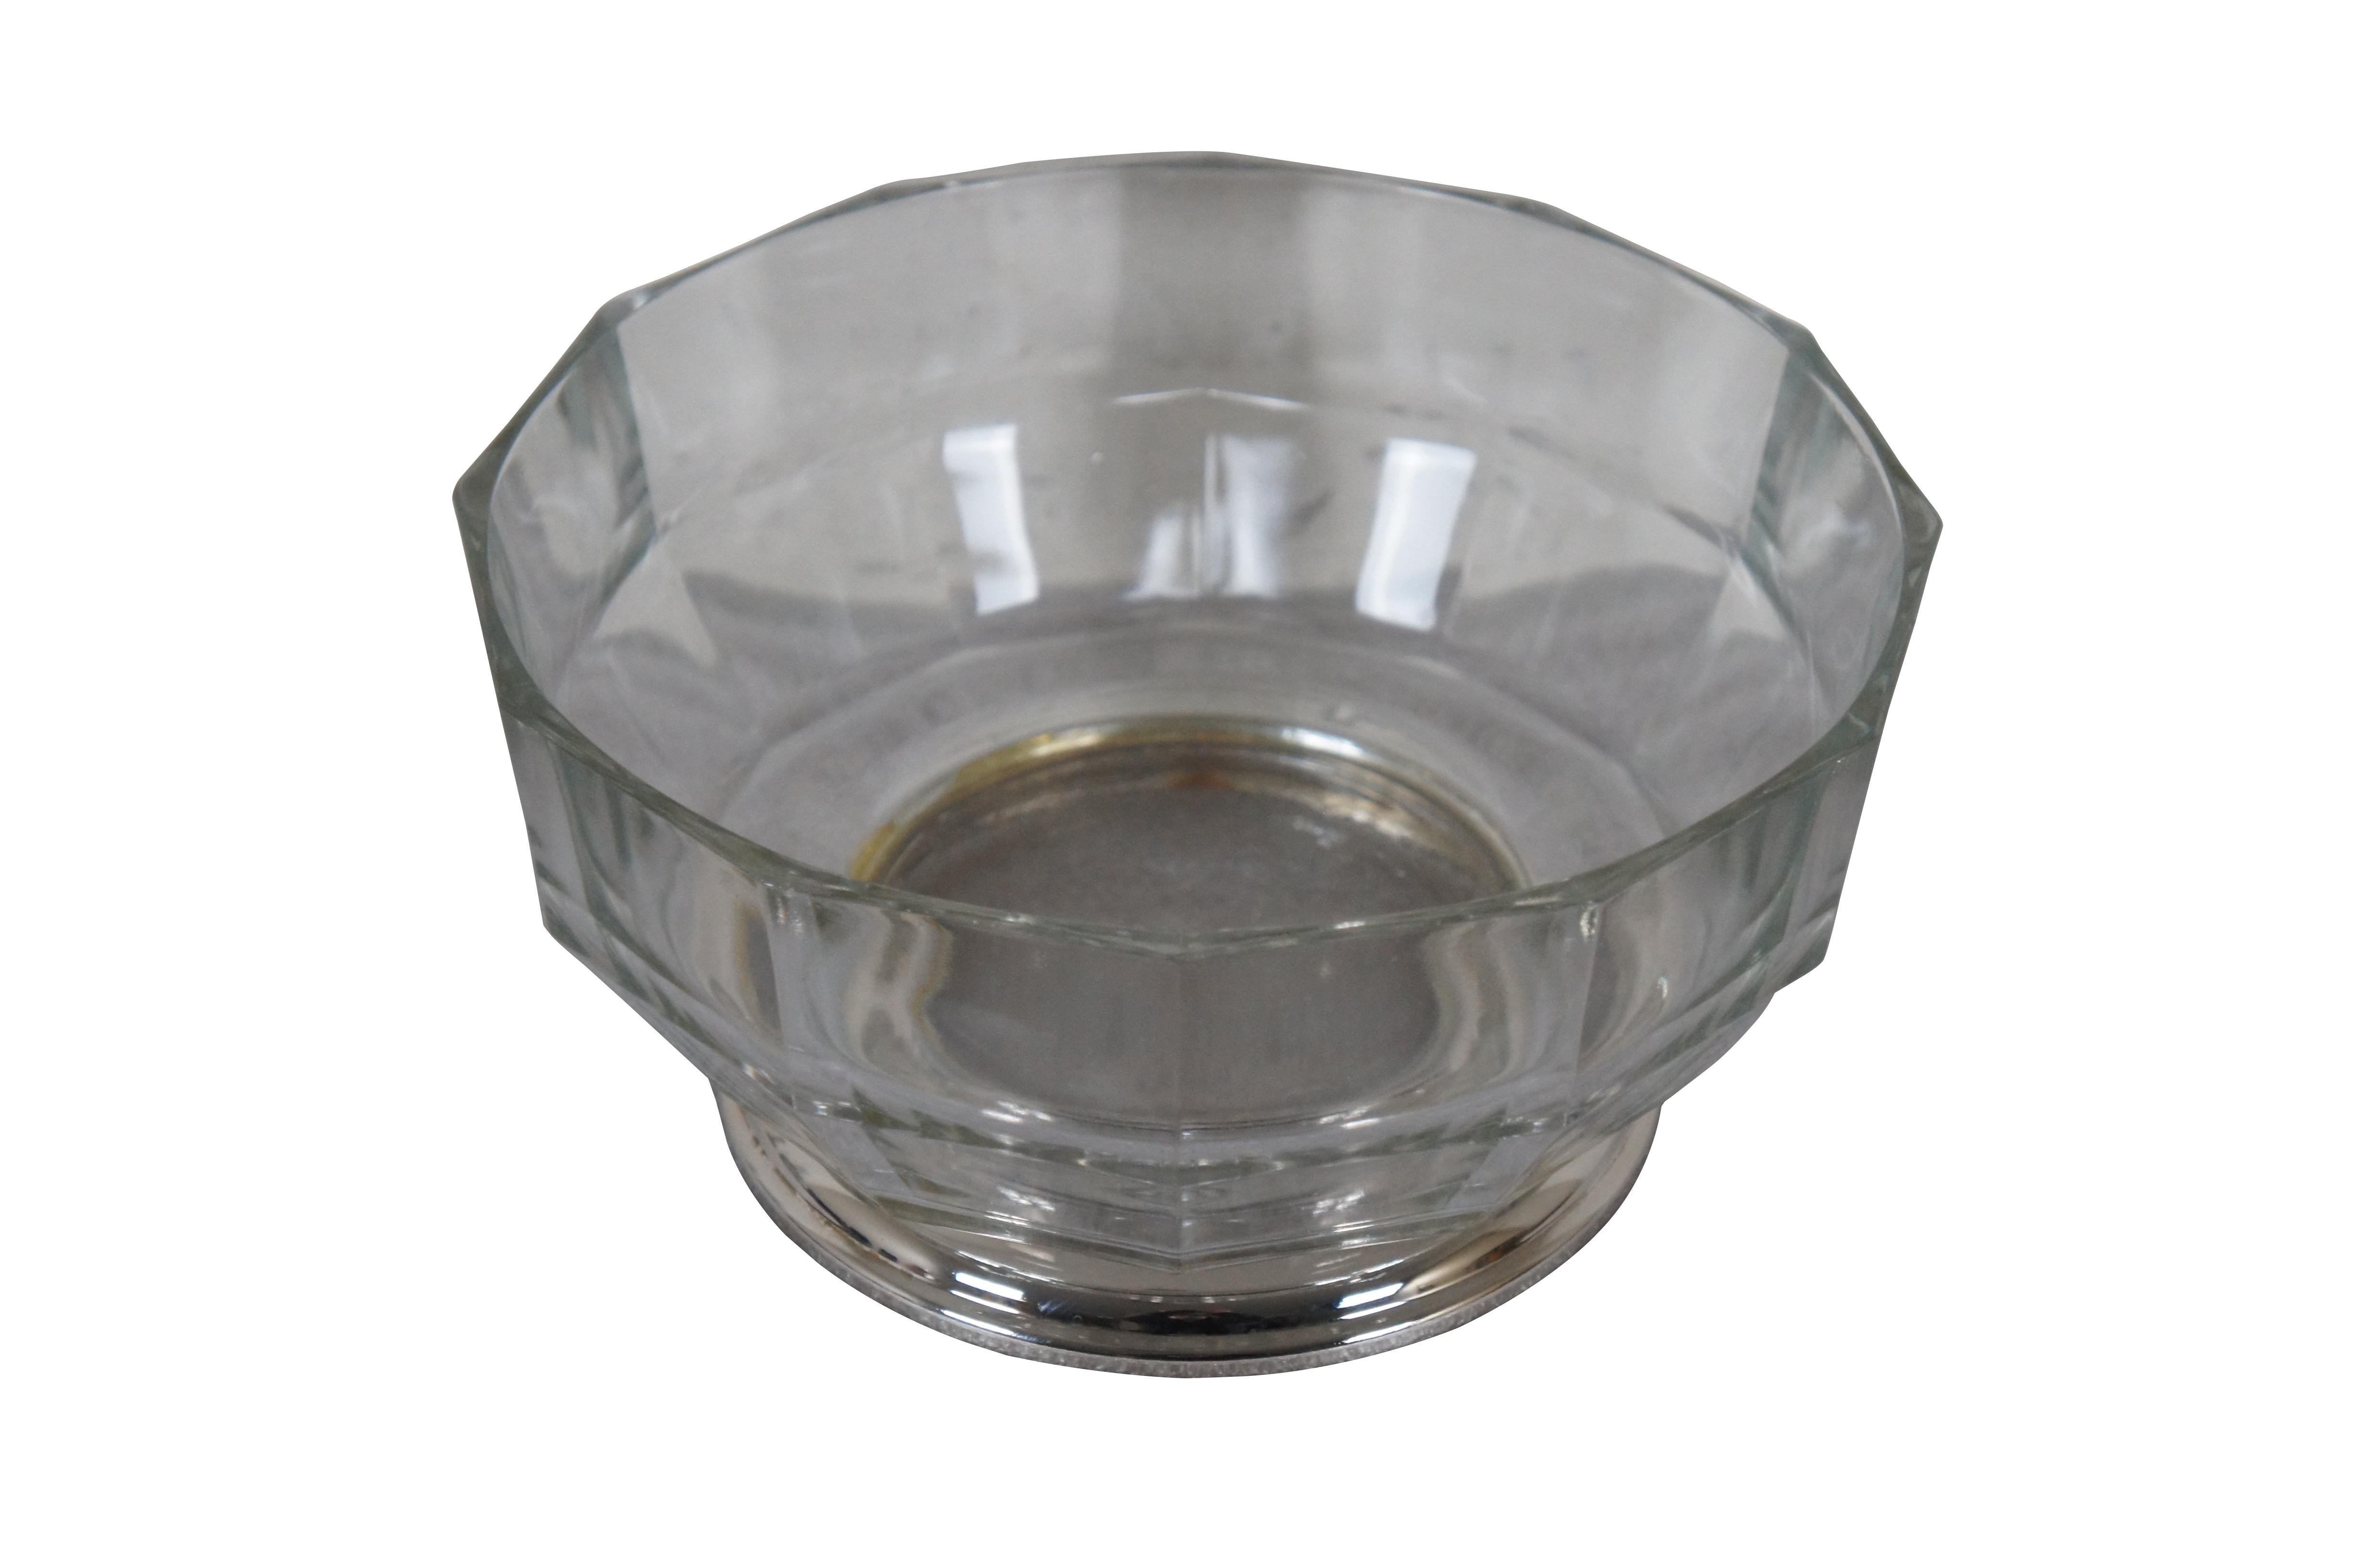 Mid to late 20th century pressed glass centerpiece / fruit bowl featuring  a mid century modern faceted design and silver plate base.

Dimensions:
9.5